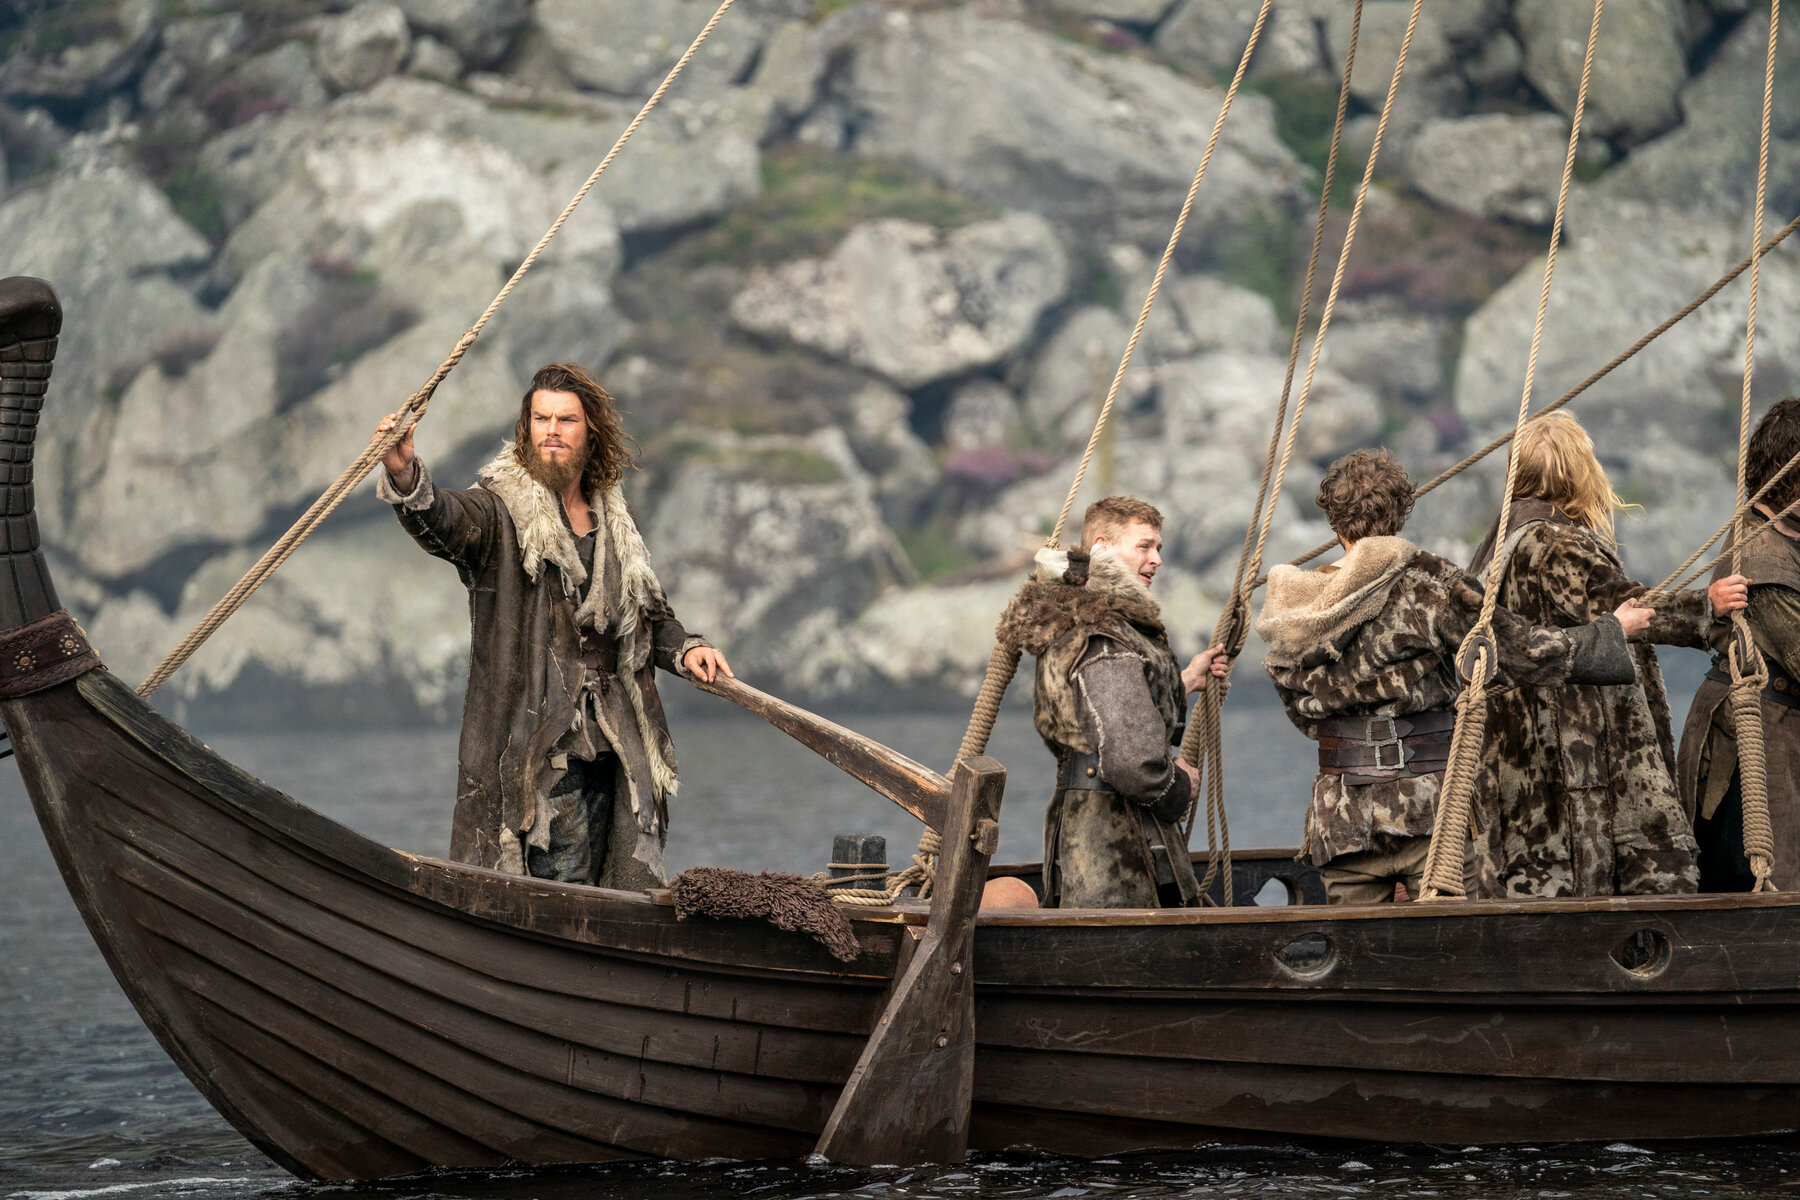 Vikings: Valhalla: The new Netflix drama everyone's buzzing about is here